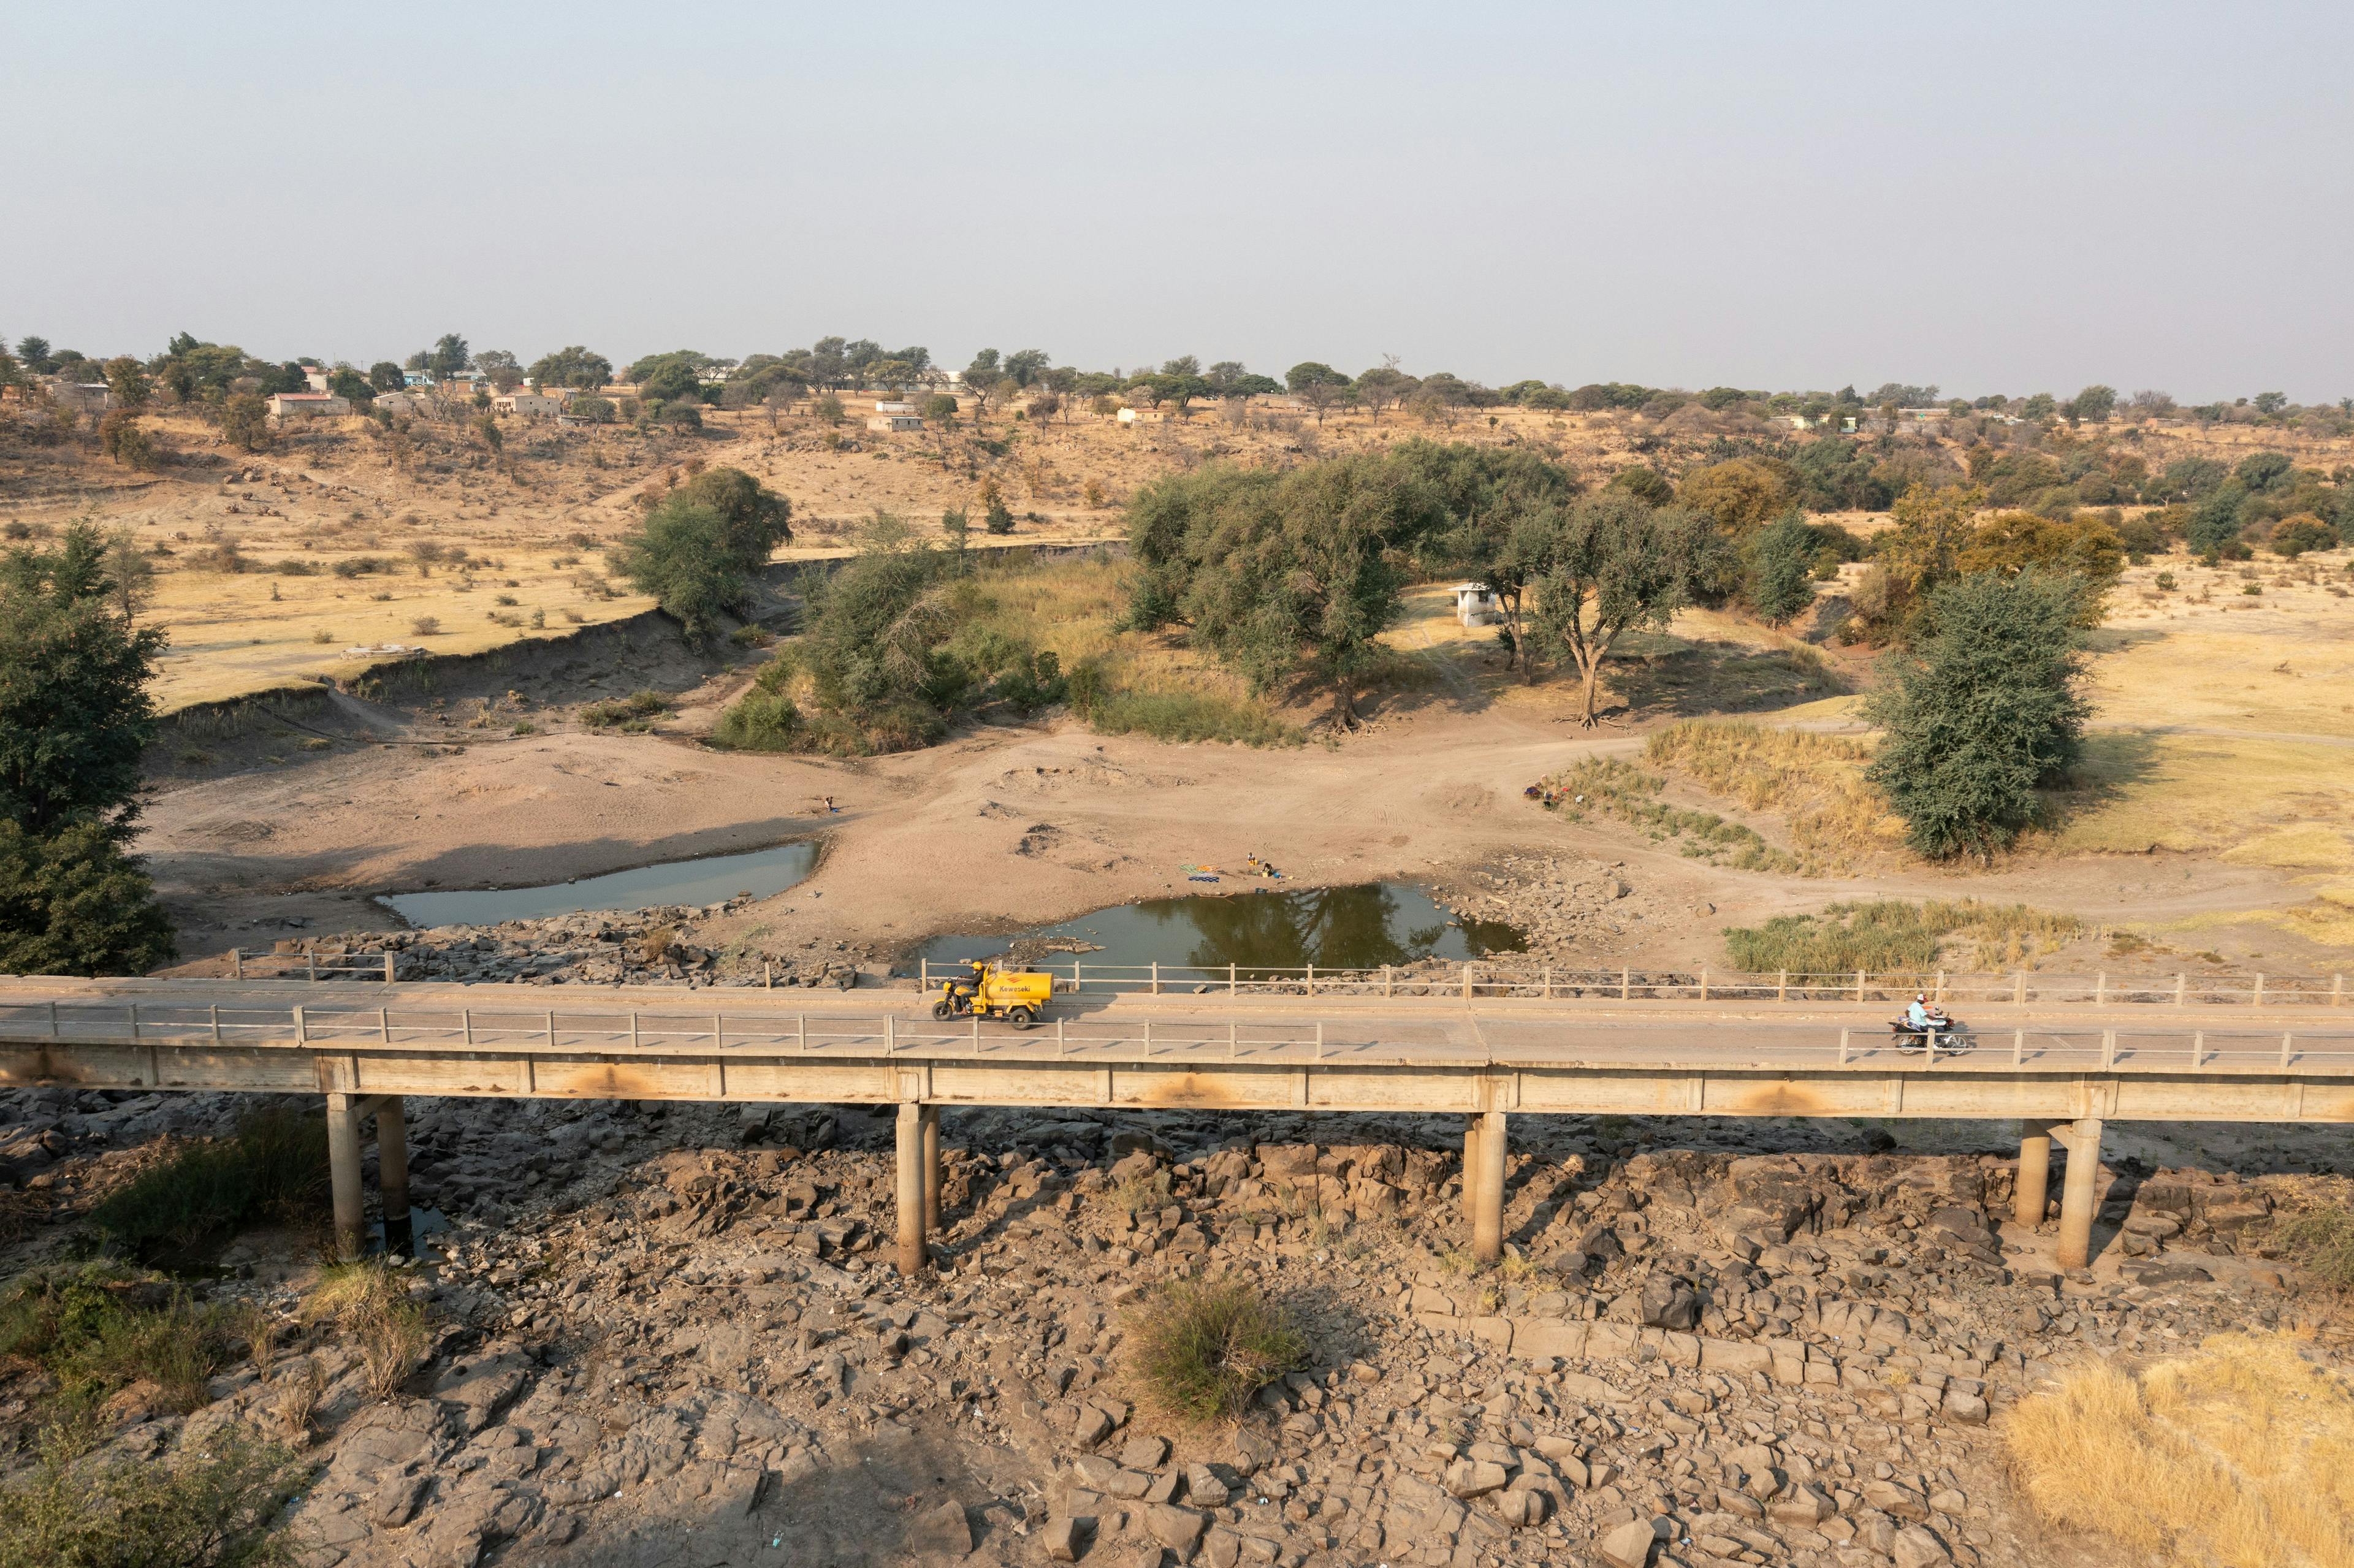 A water seller crosses the drying river on his way to town. Water resources must be managed efficiently and sustainably using locally-tailored solutions to support the continent’s growing population.